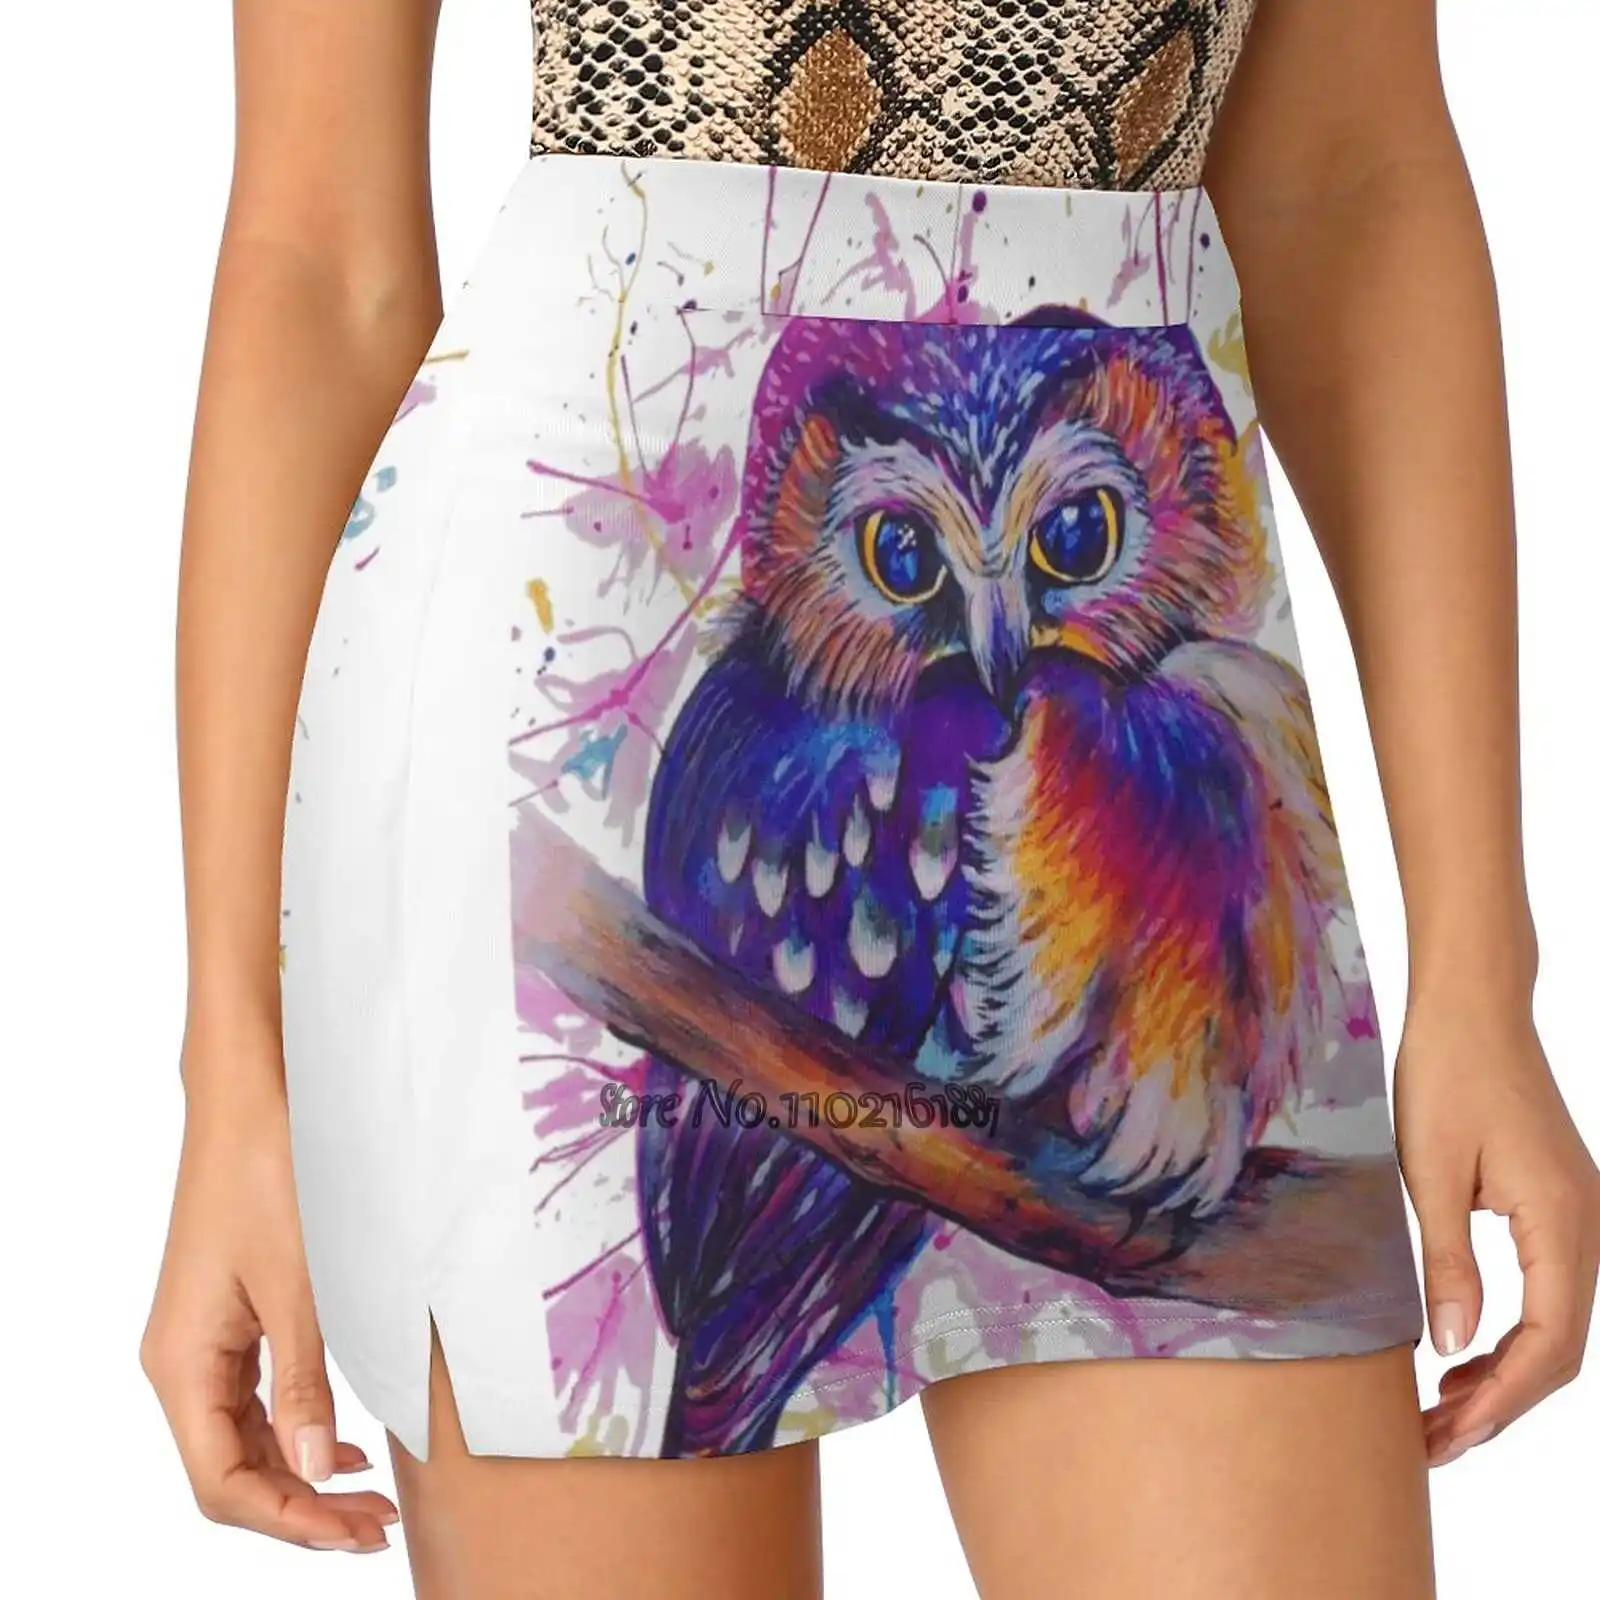 

Twinkle Night Owl S-4Xl Tennis Skirts Golf Fitness Athletic Shorts Skirt With Phone Pocket Owl Colourful Owl Multicoloured Owl